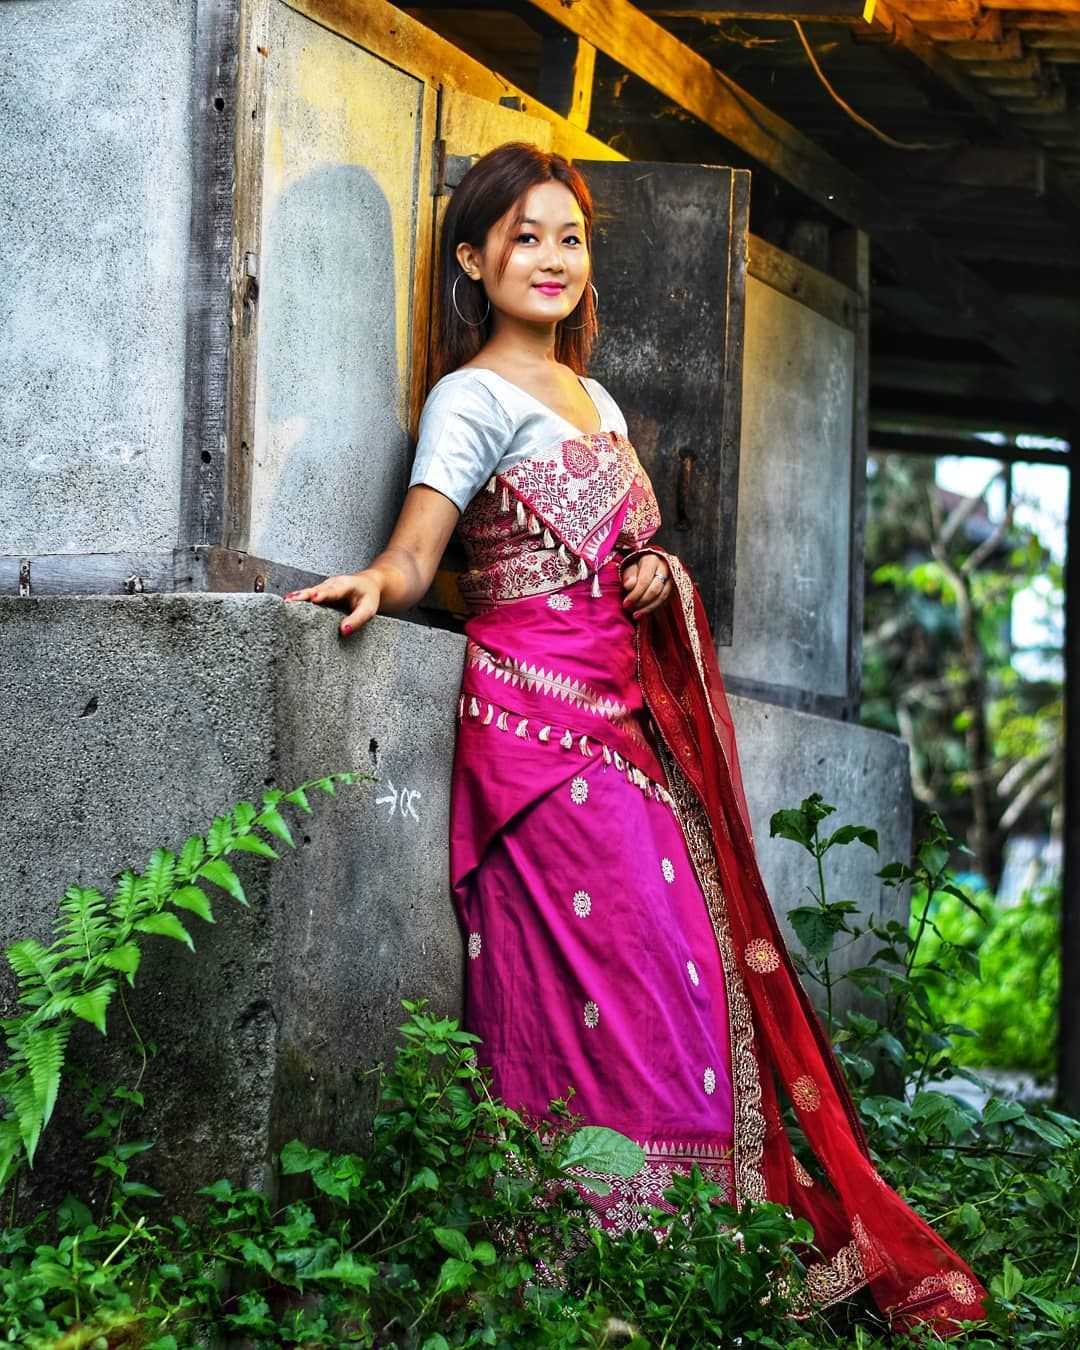 Bodo Traditional Dress: Discover 9 Absolutely Gorgeous Pictures - You Won't Believe #4 #traditional-fashion